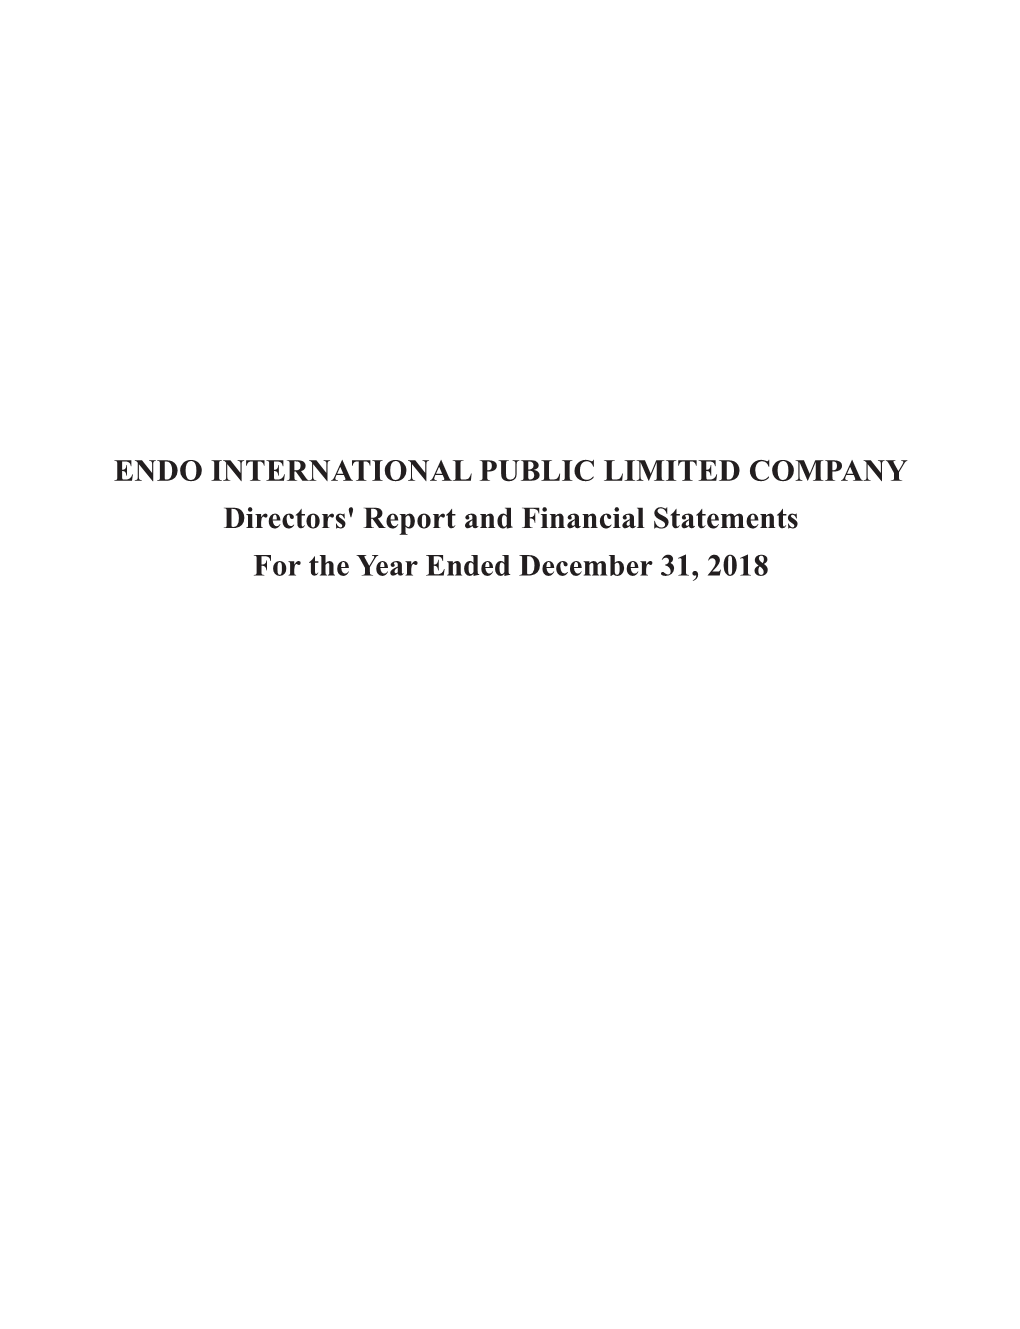 ENDO INTERNATIONAL PUBLIC LIMITED COMPANY Directors' Report and Financial Statements for the Year Ended December 31, 2018